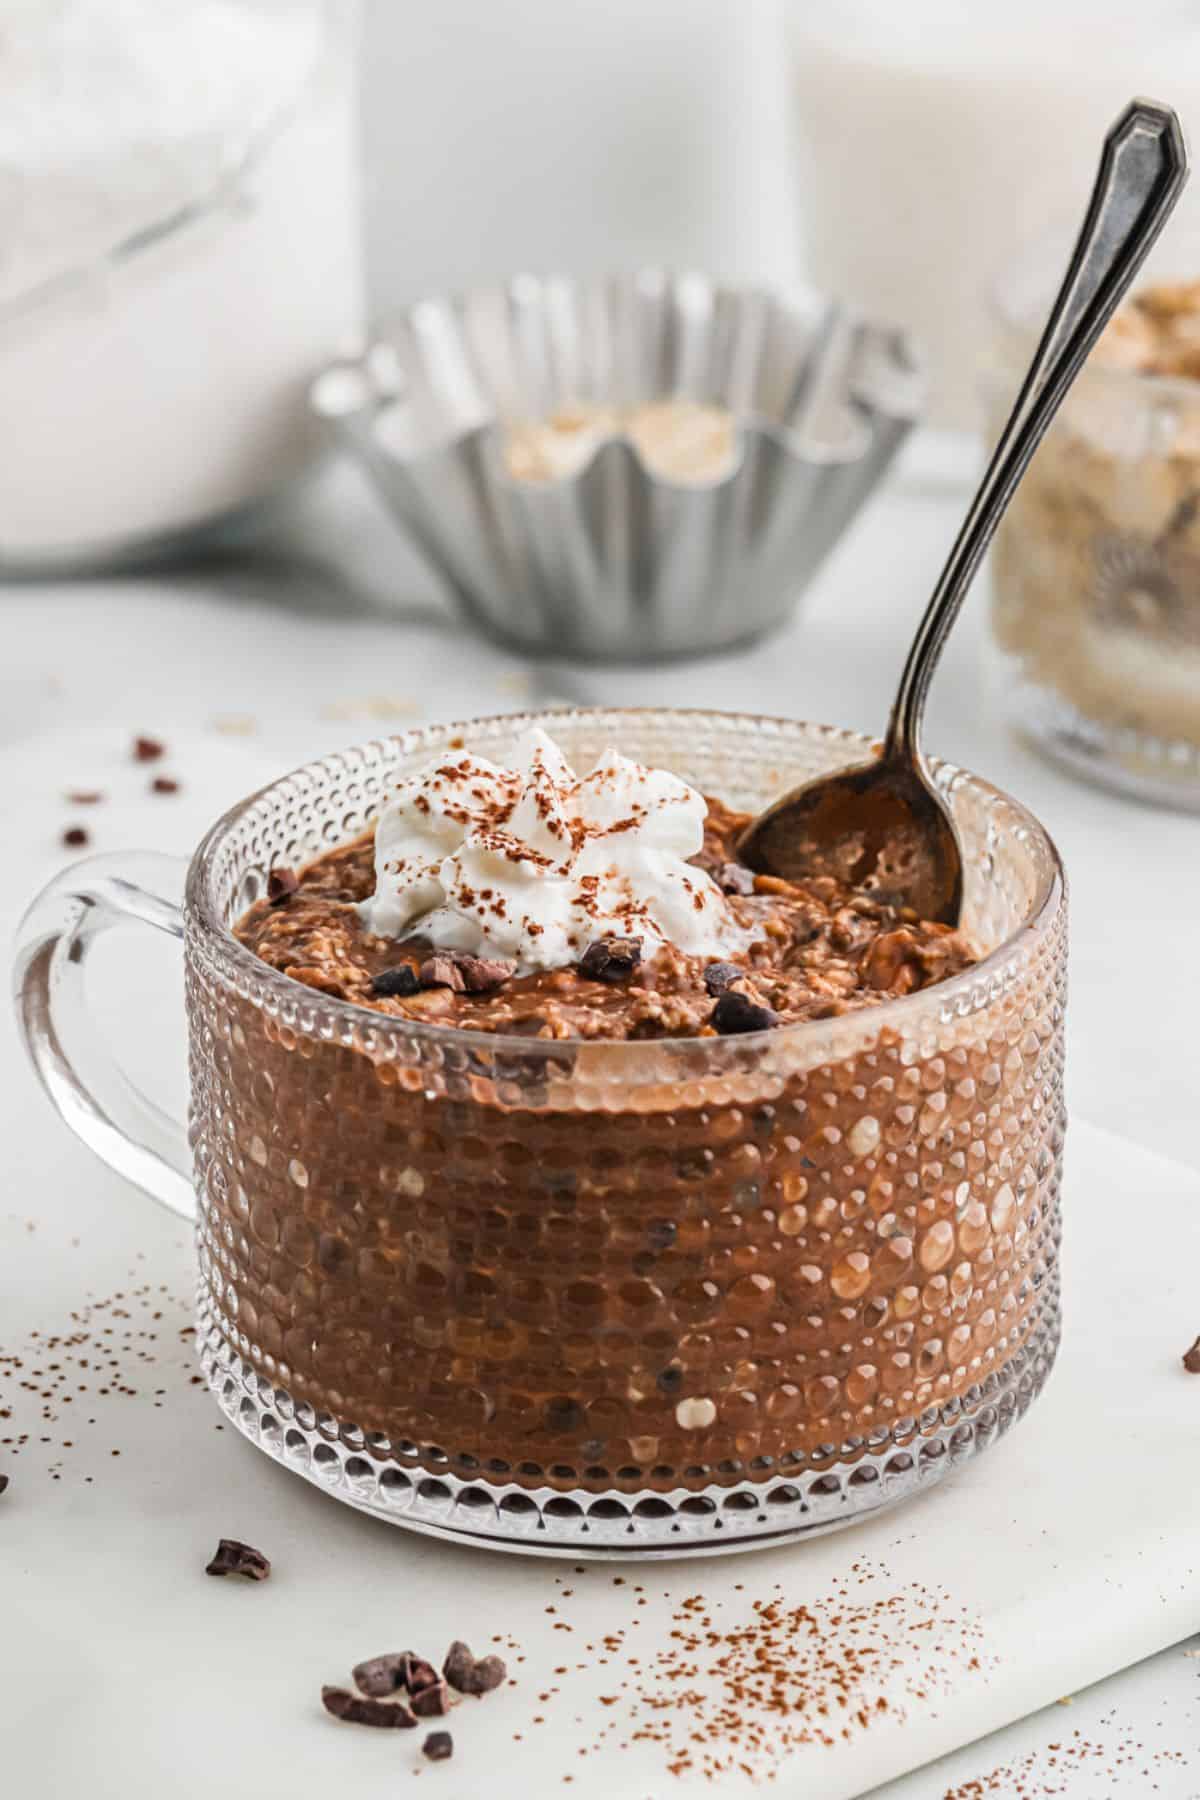 Oats in glass topped with whipped cream and garnished with chocolate.